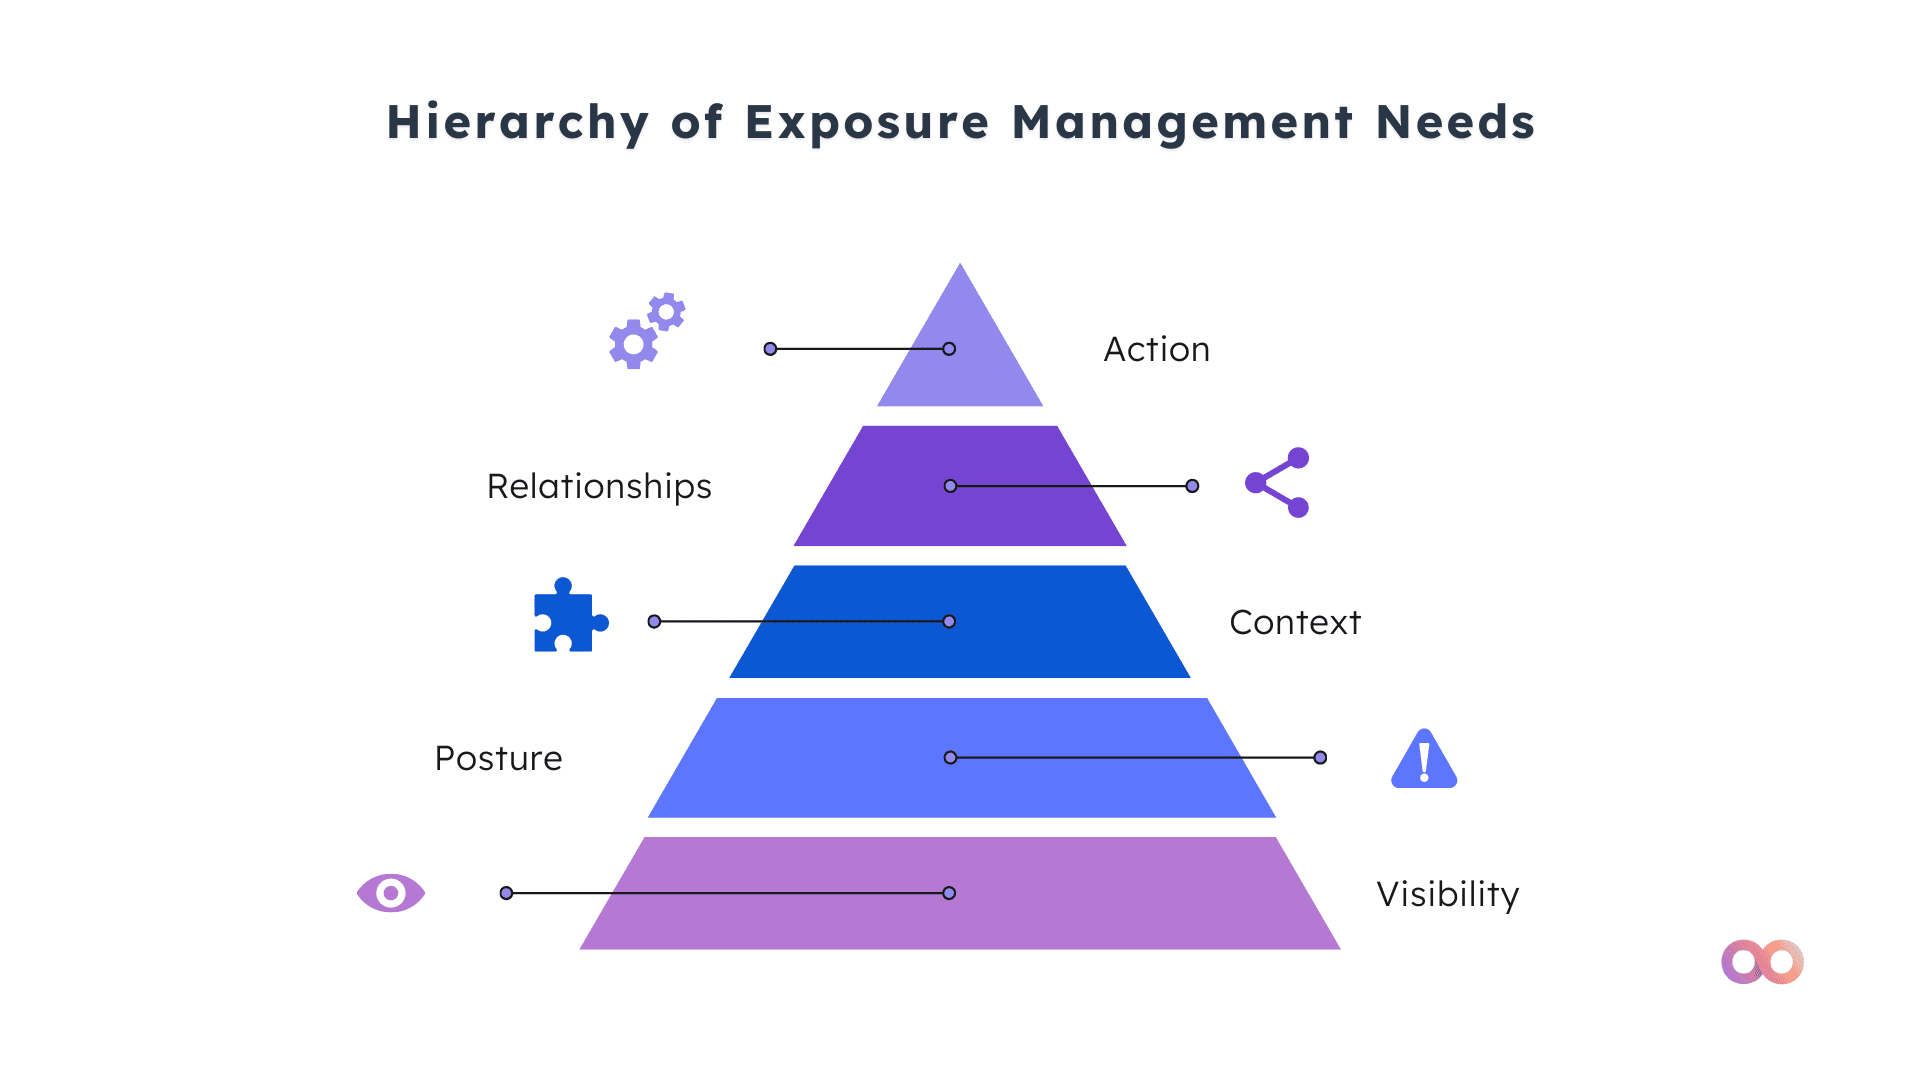 Noetic Cyber applies Maslow's Hierarchy of Needs in Exposure Management: Visibility, Posture, Context, Relationships, Action